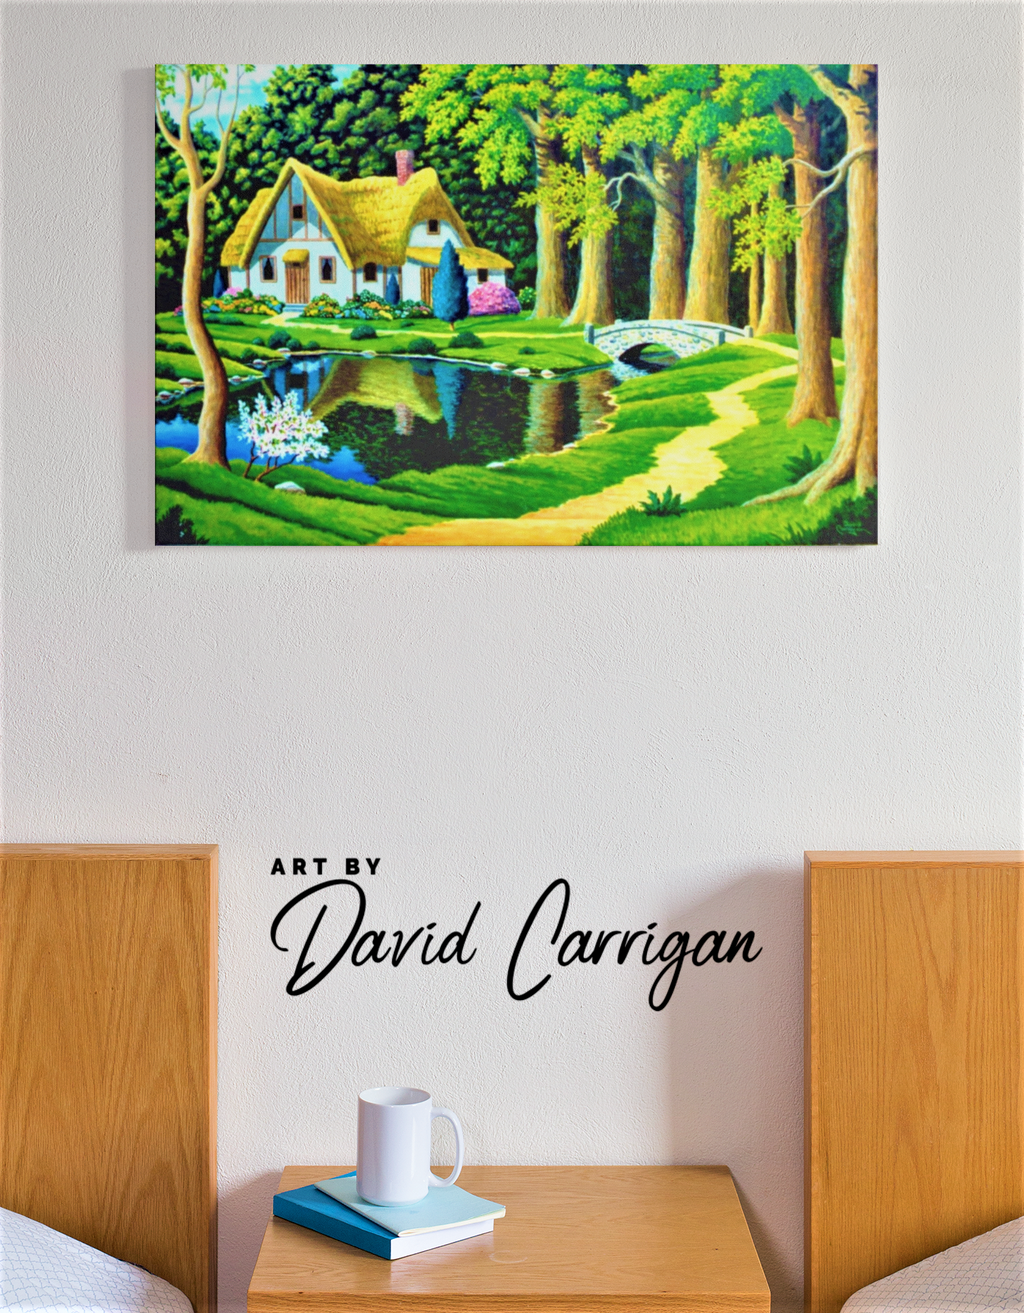 Fantasy Cottage, Thatched Roof Fairy Tale Cottage Canvas Art by David Carrigan.